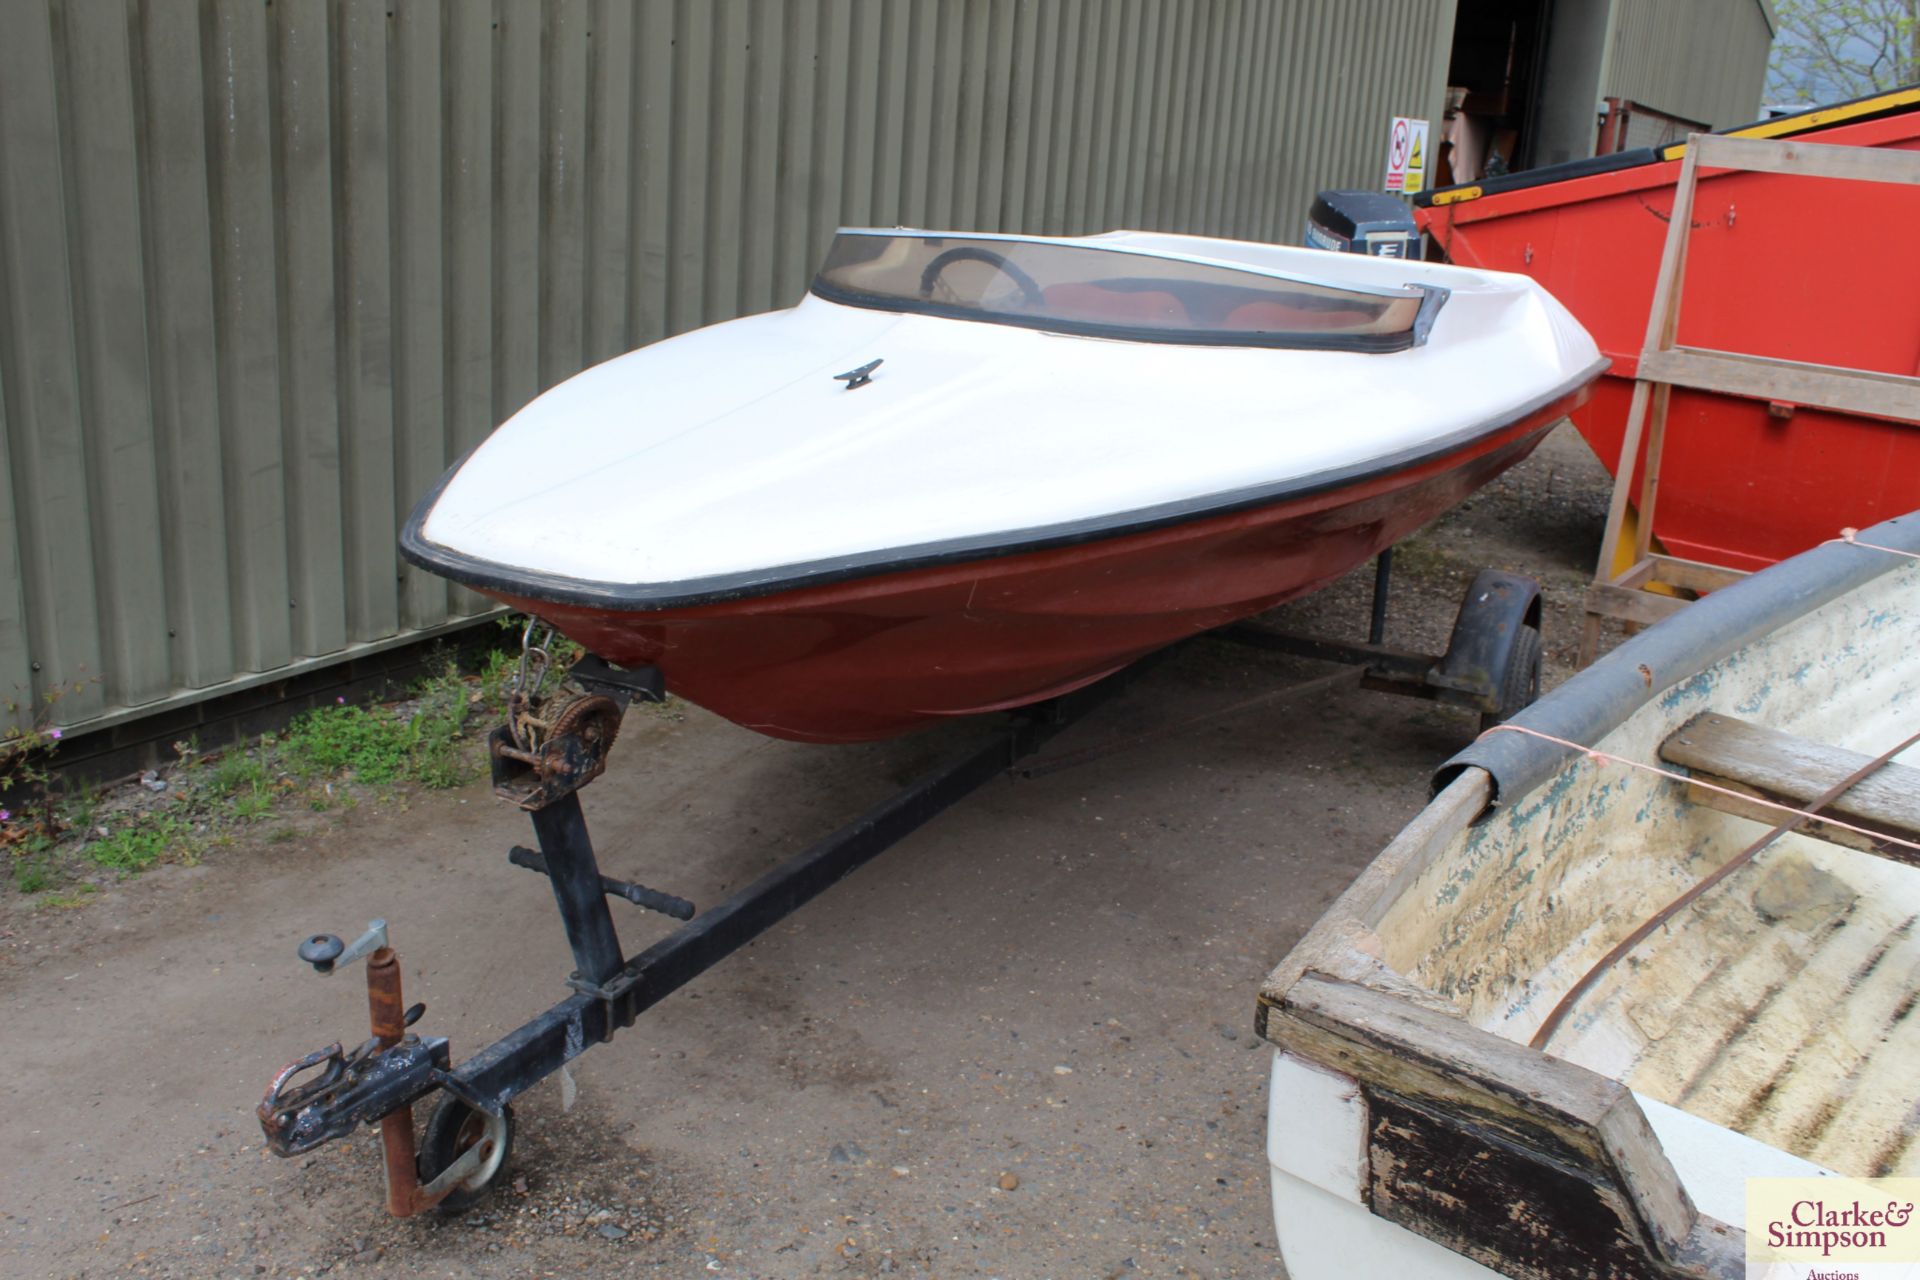 13ft speedboat. With Evinrude 60HP outboard (runs and pumps water), trailer, water skis, knee board,